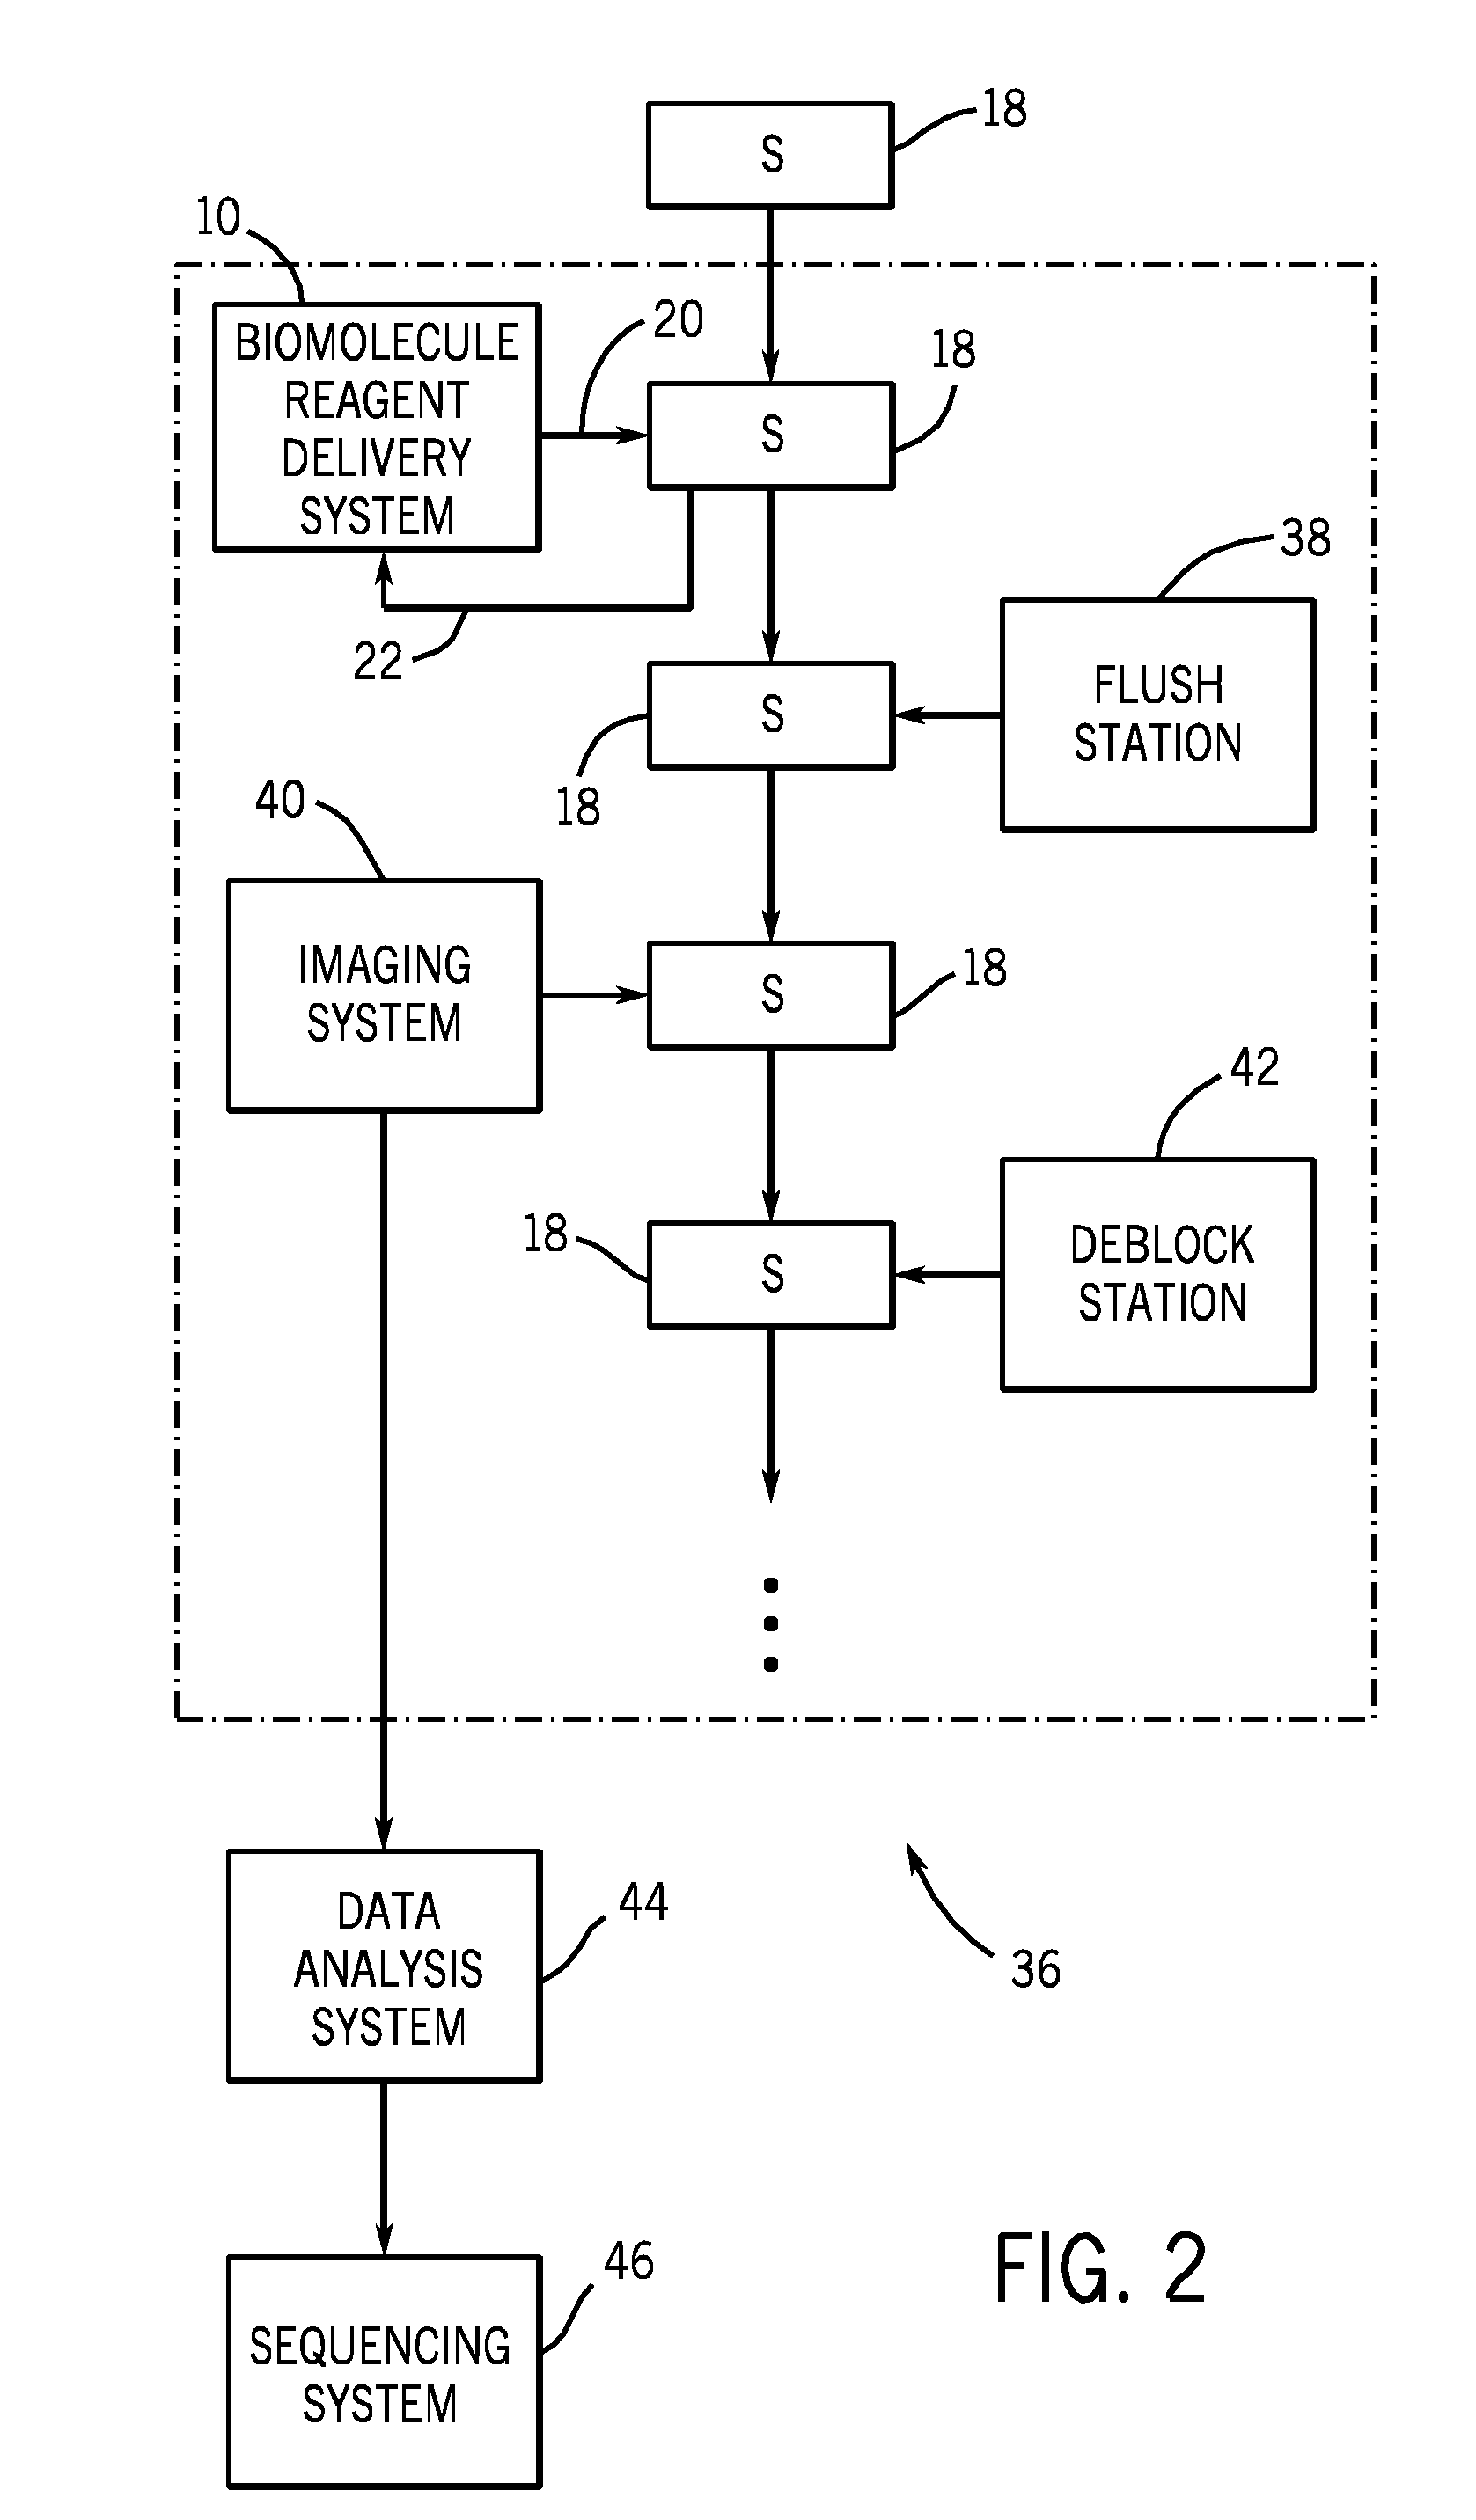 Efficient biomolecule recycling method and system